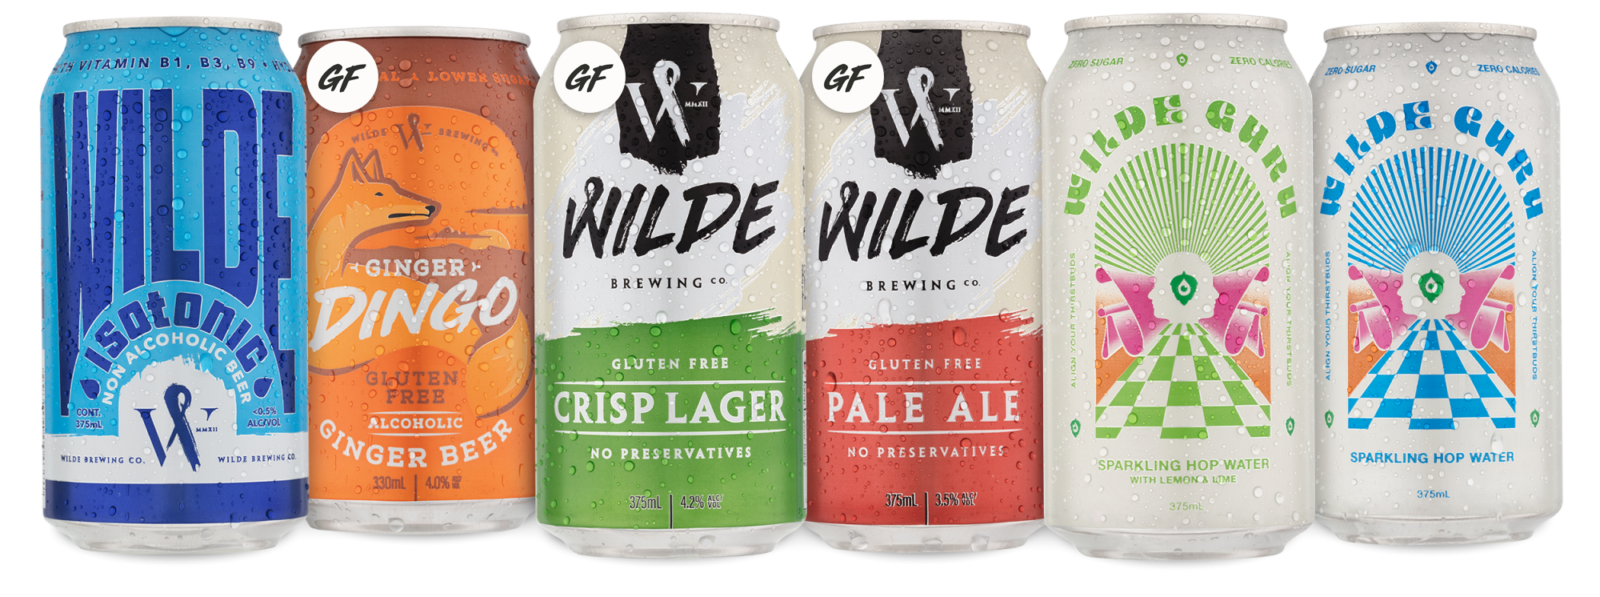 Wilde Brewing Co gluten free beer, Isotonic non-alcoholic beer, Ginger Dingo alcoholic ginger beer and Guru sparkling hop water